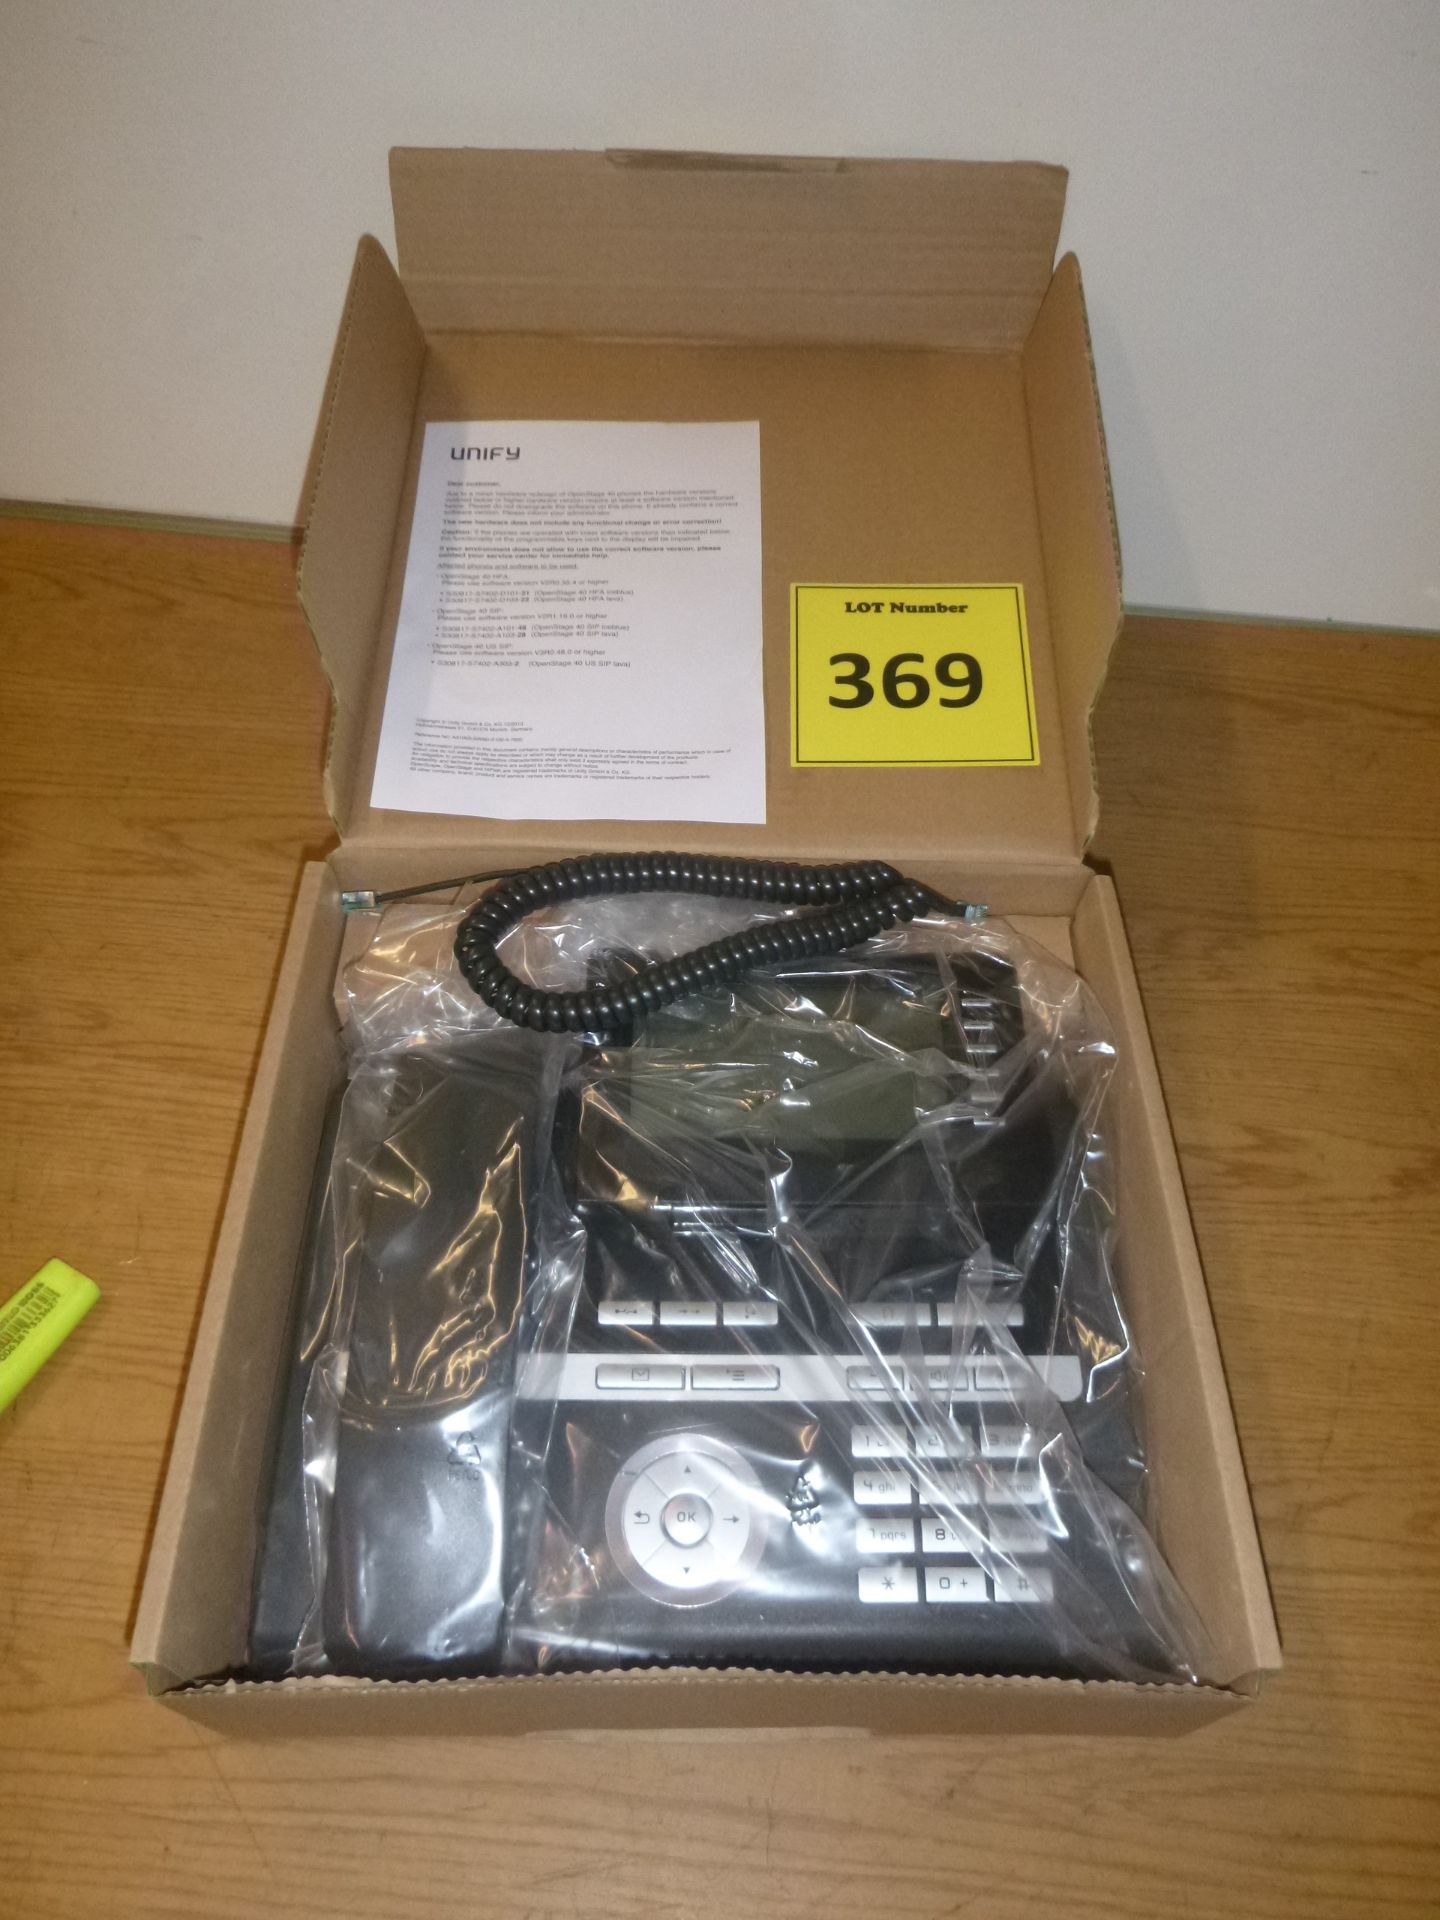 UNIFY OPENSTAGE 40 HFA TELEPHONE. LAVA. NEW & BOXED - Image 2 of 2